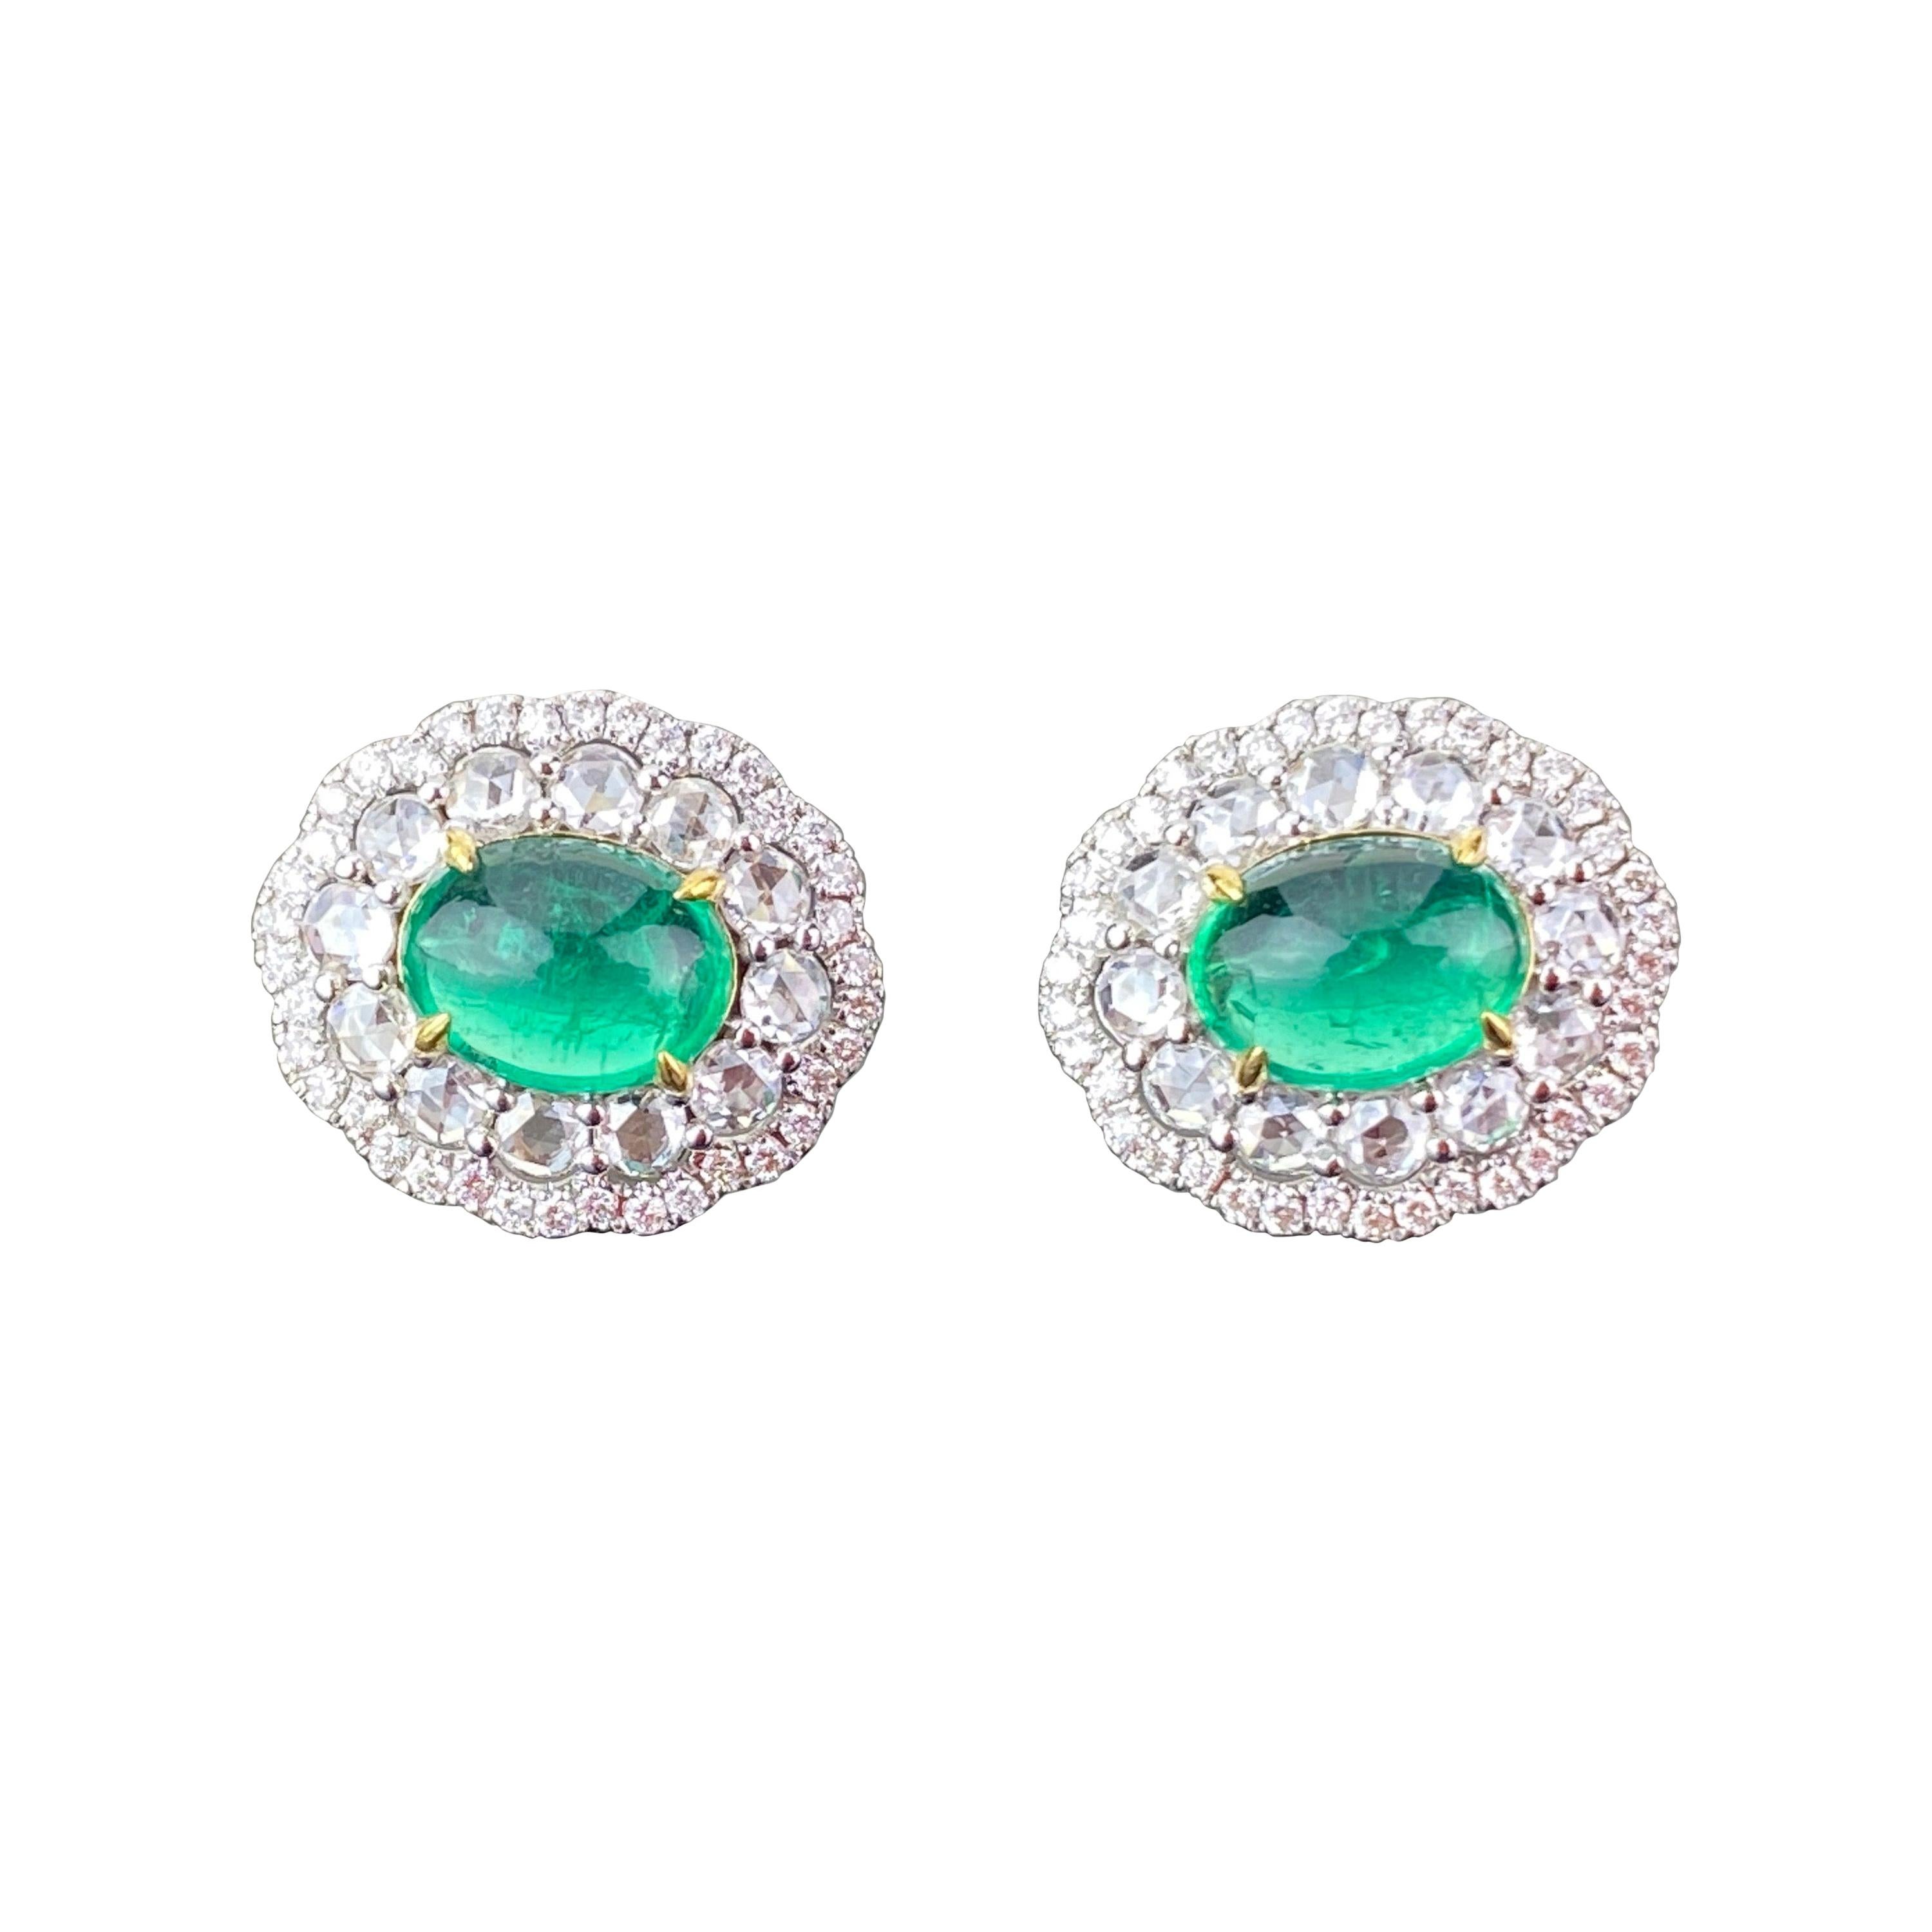 2.36 Carat Emerald Cabochon and Diamond Studs For Sale